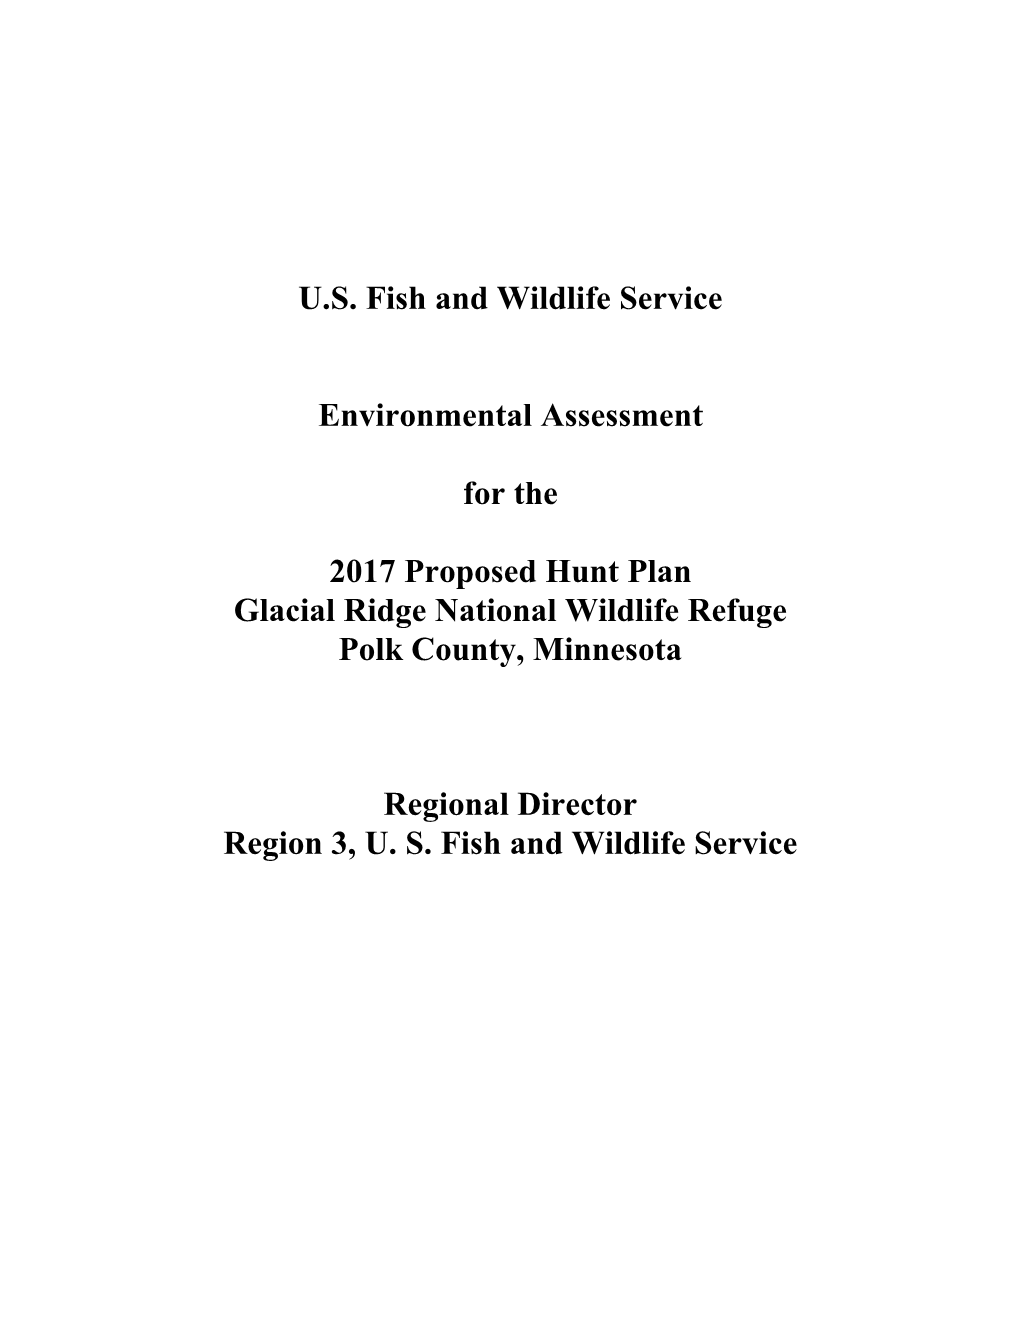 U.S. Fish and Wildlife Service Environmental Assessment for The